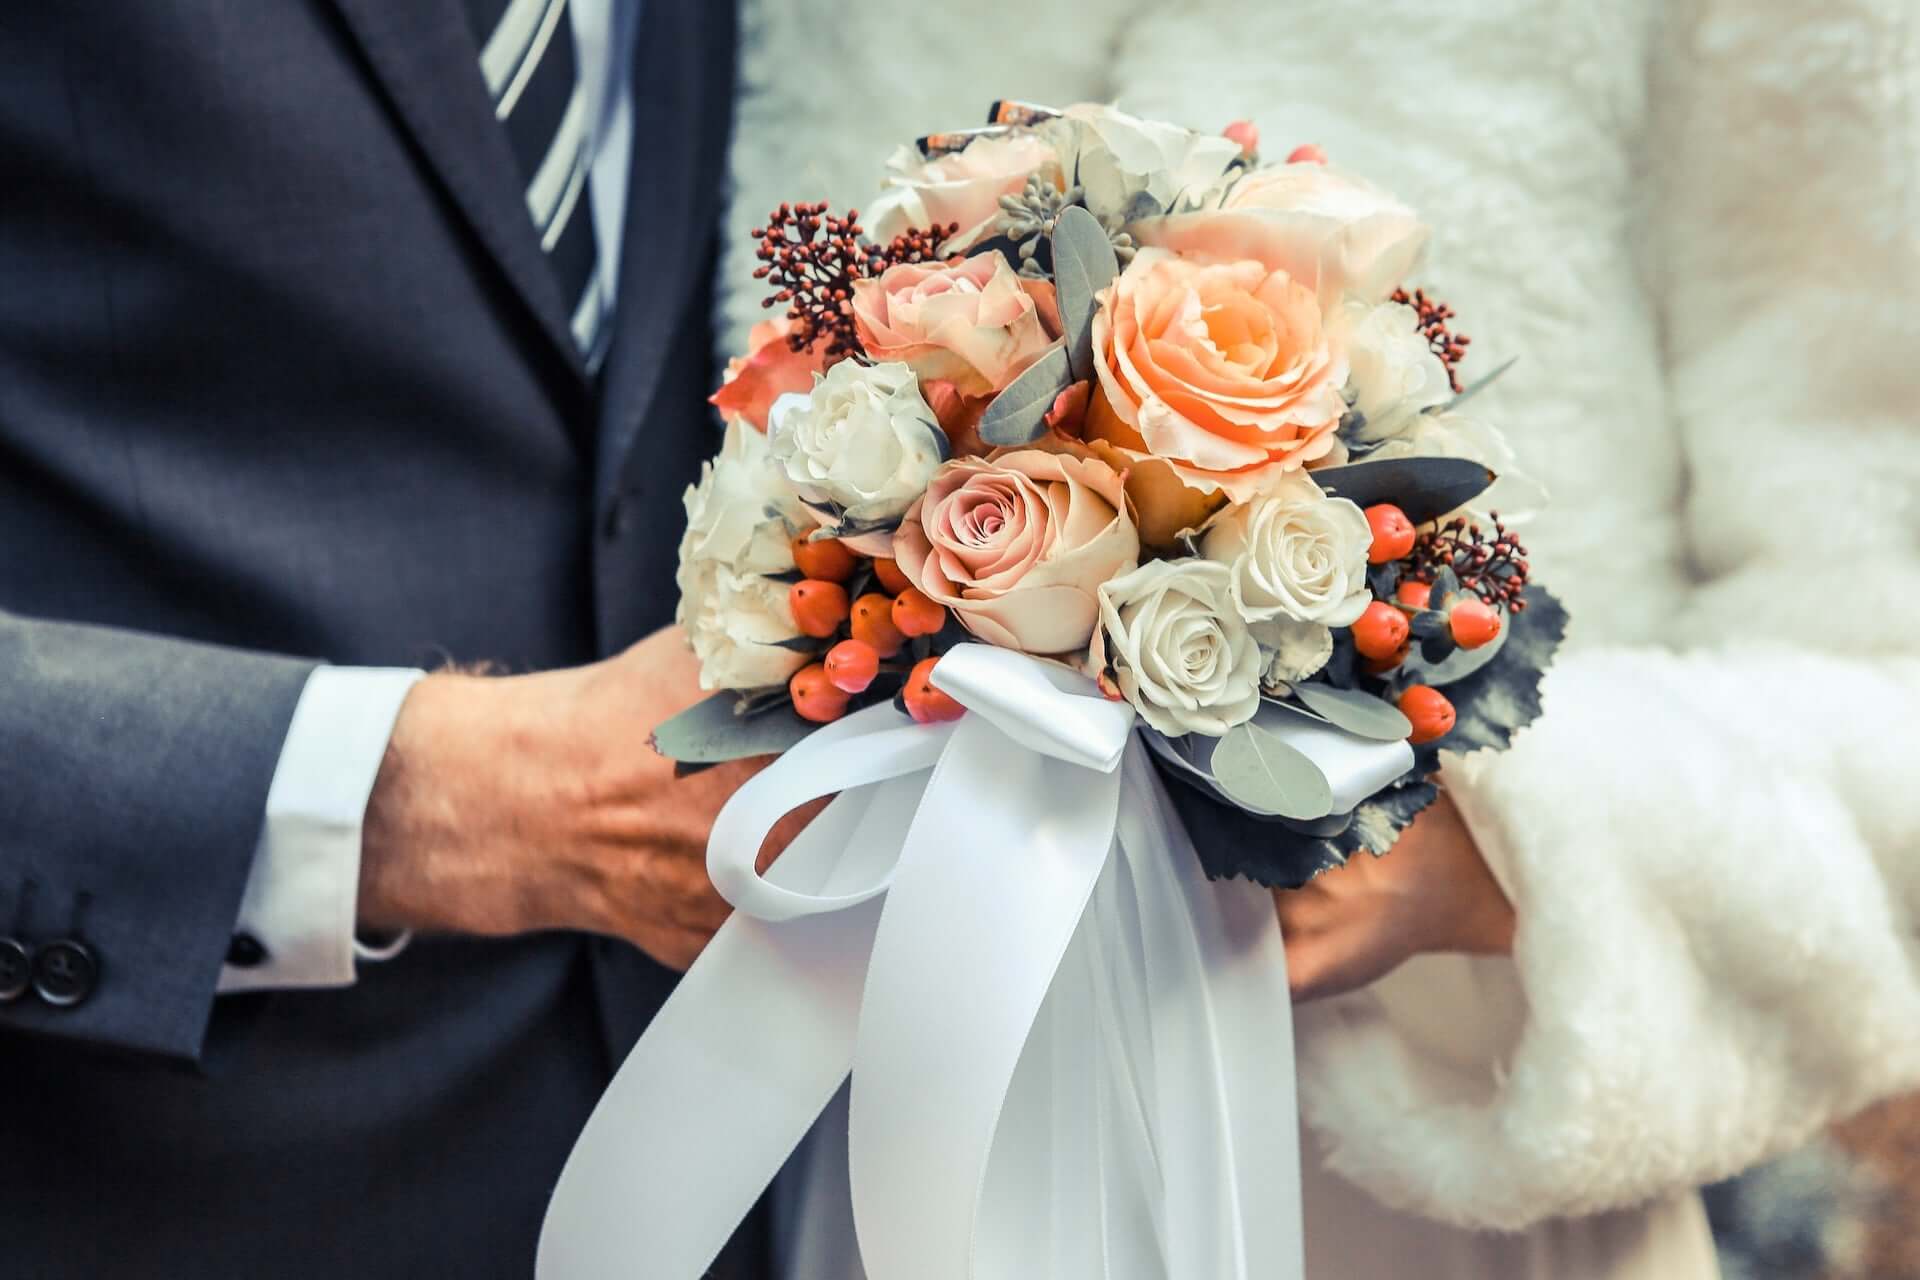 A wedding couple holding a bouquet of peach and white roses and holly berries.